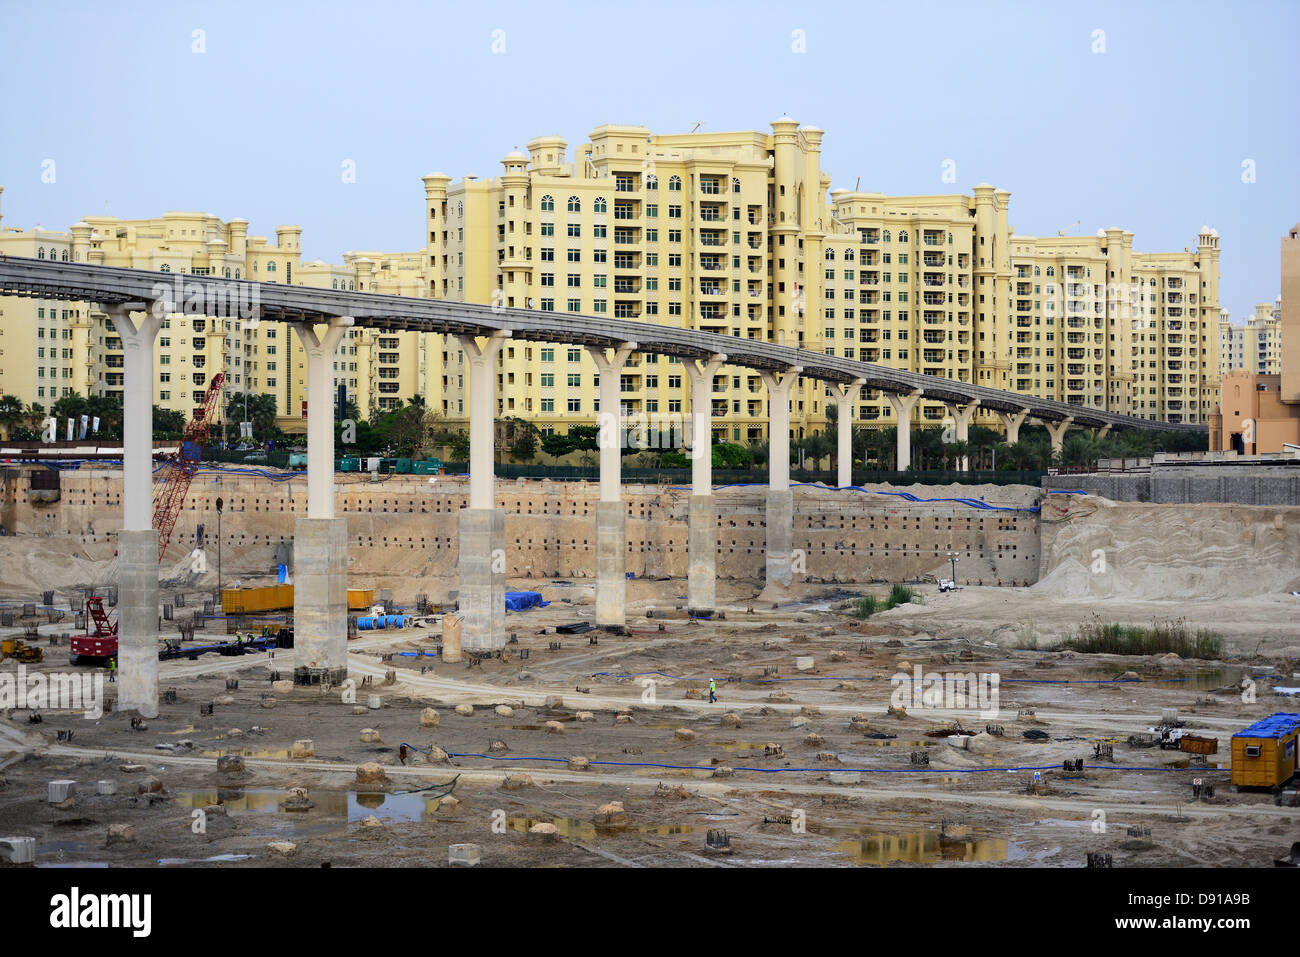 Dubai building industry, construction work being carried out in the city of Dubai, United Arab Emirates Stock Photo